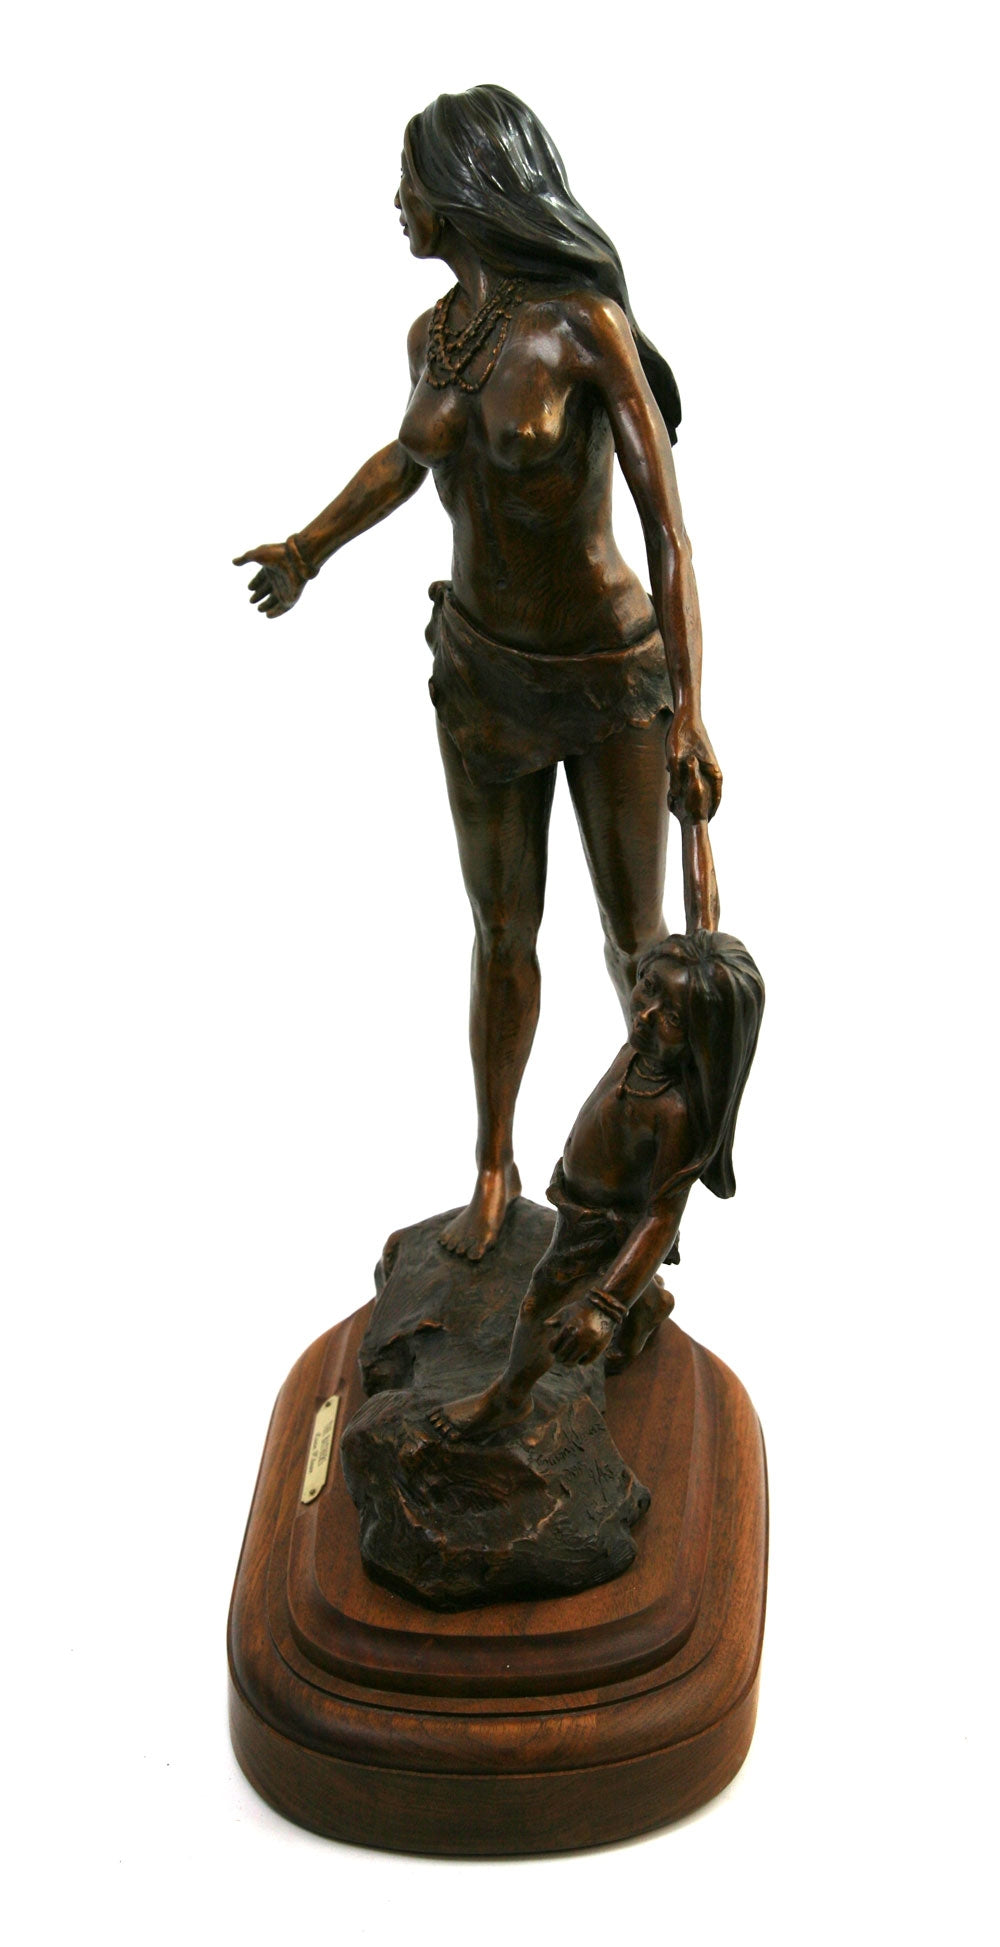 Susan Kliewer - The Bathers (Last in the Edition), Bronze, Edition 9/45 (SC91104-015-004) 3
